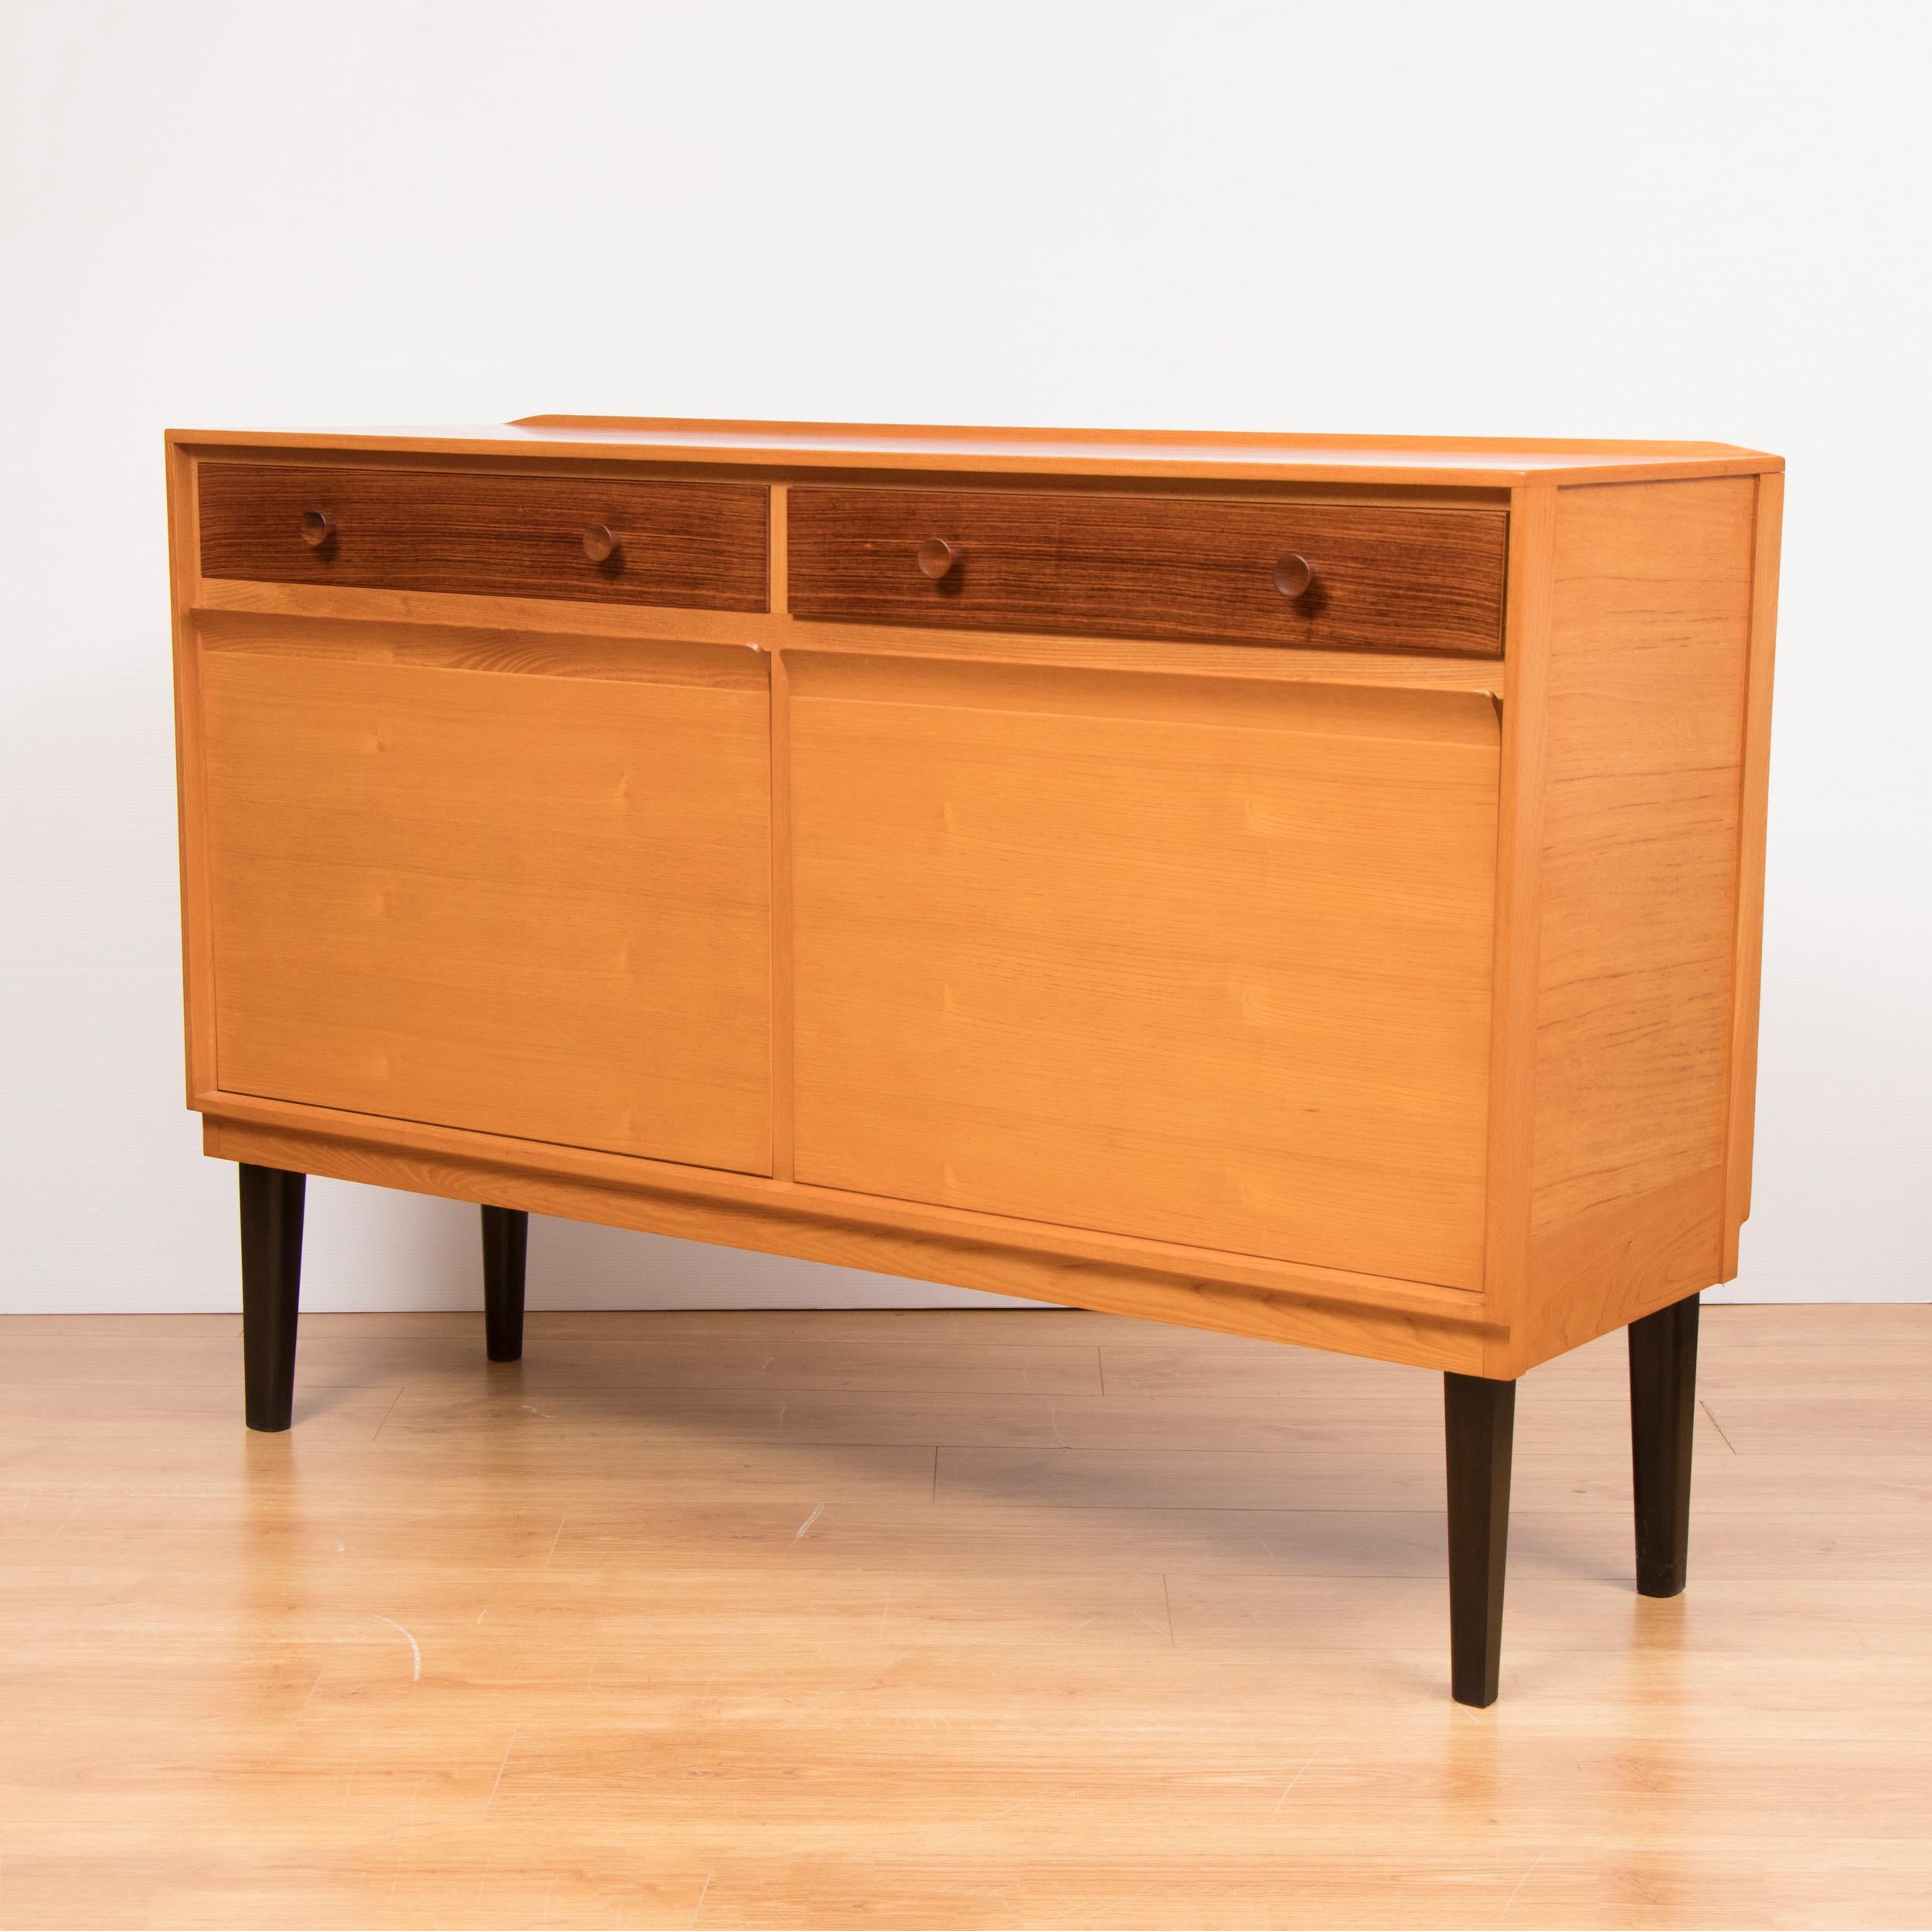 Midcentury sideboard credenza in a beautiful golden oakwood with contrasting Rosewood drawers.
Mid-Century Modern design. Robert Heritage sideboard credenza for Heals Tottenham Court Road London. A very early sideboard credenza designed by Robert